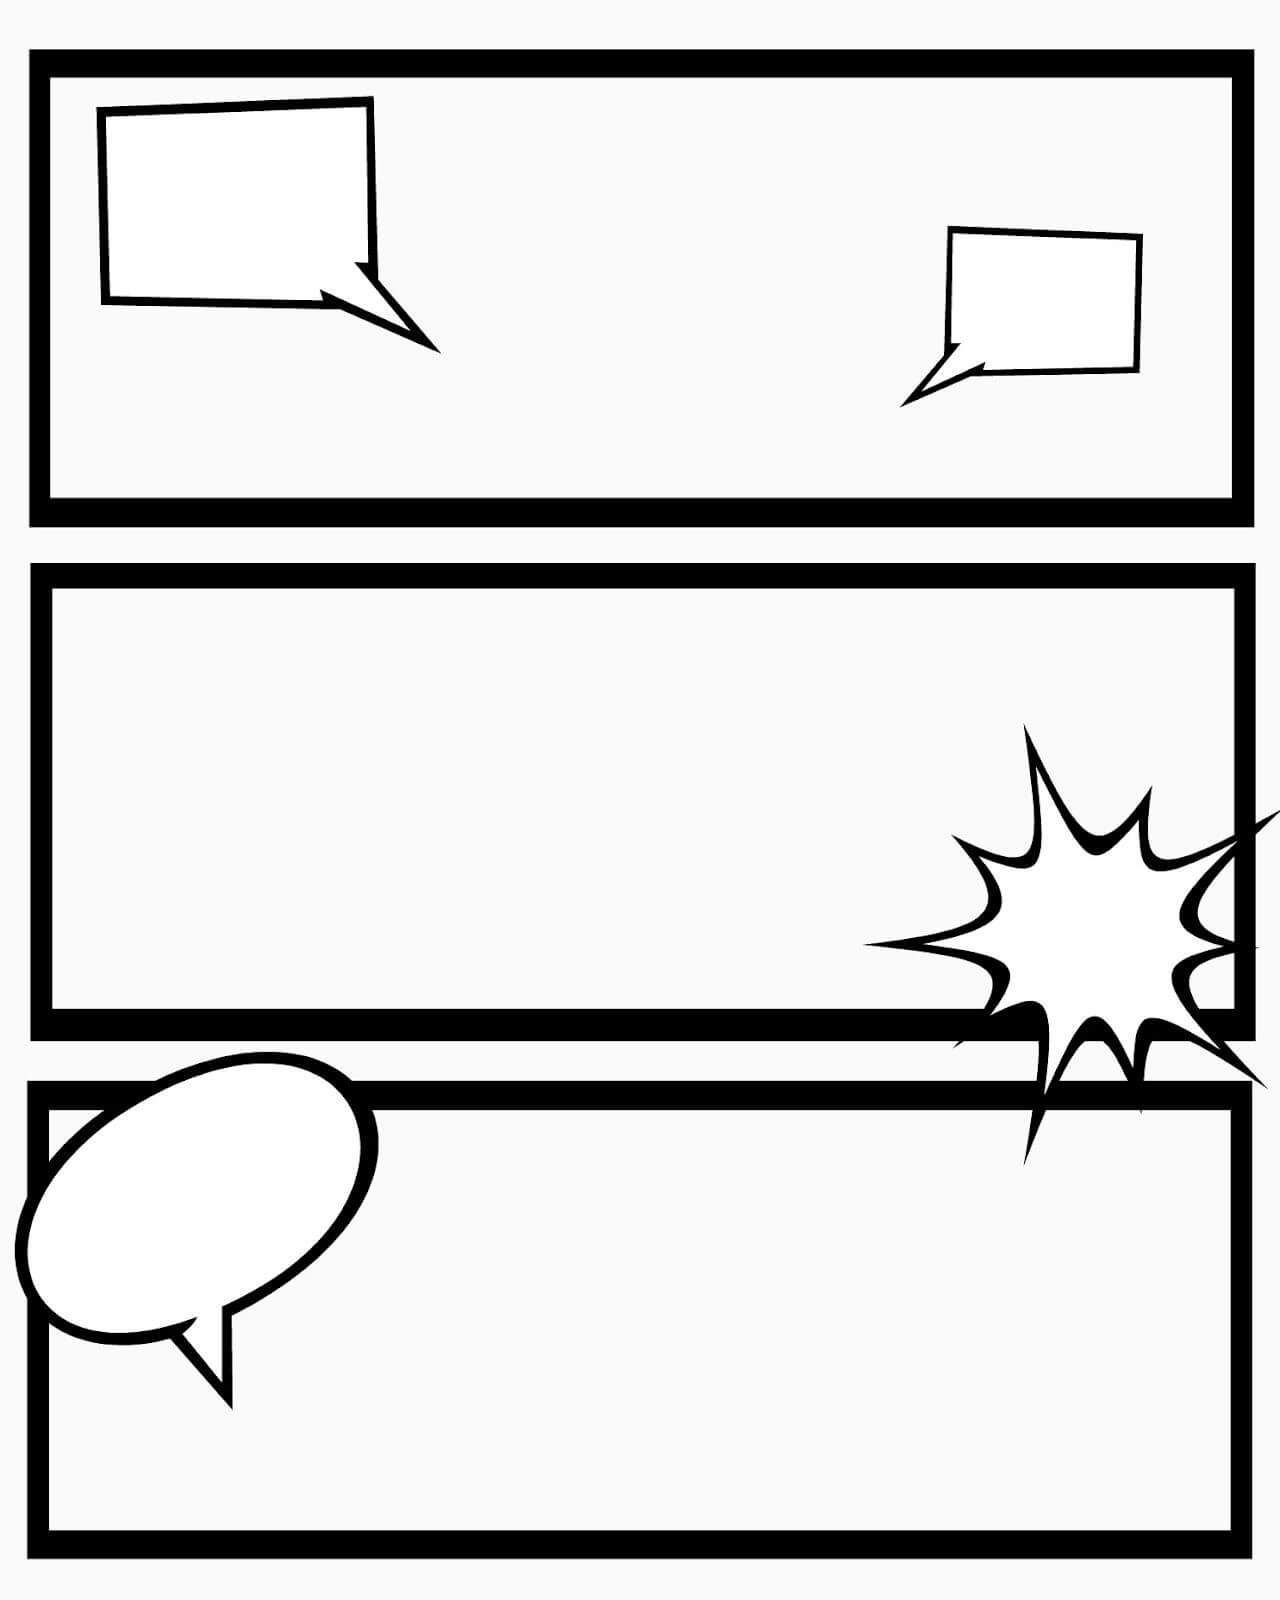 School Hasn't Started Yet In Our House, But The Kids Have With Regard To Printable Blank Comic Strip Template For Kids